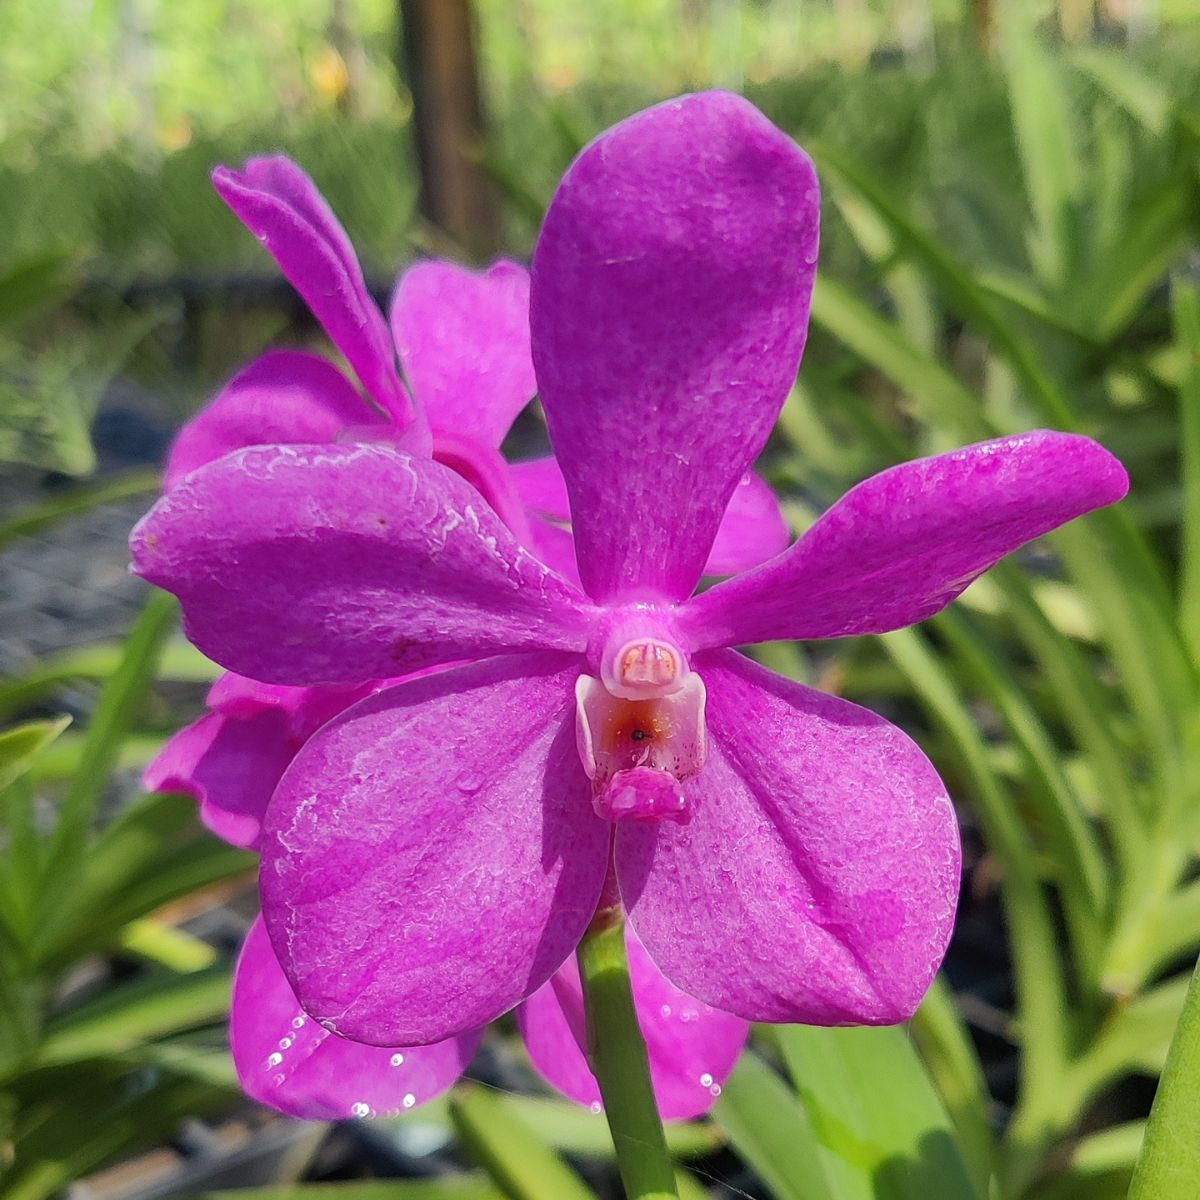 Mokara Calipso Jumbo 4N Orchid - Exquisite Blooms in a Variety of Captivating Color